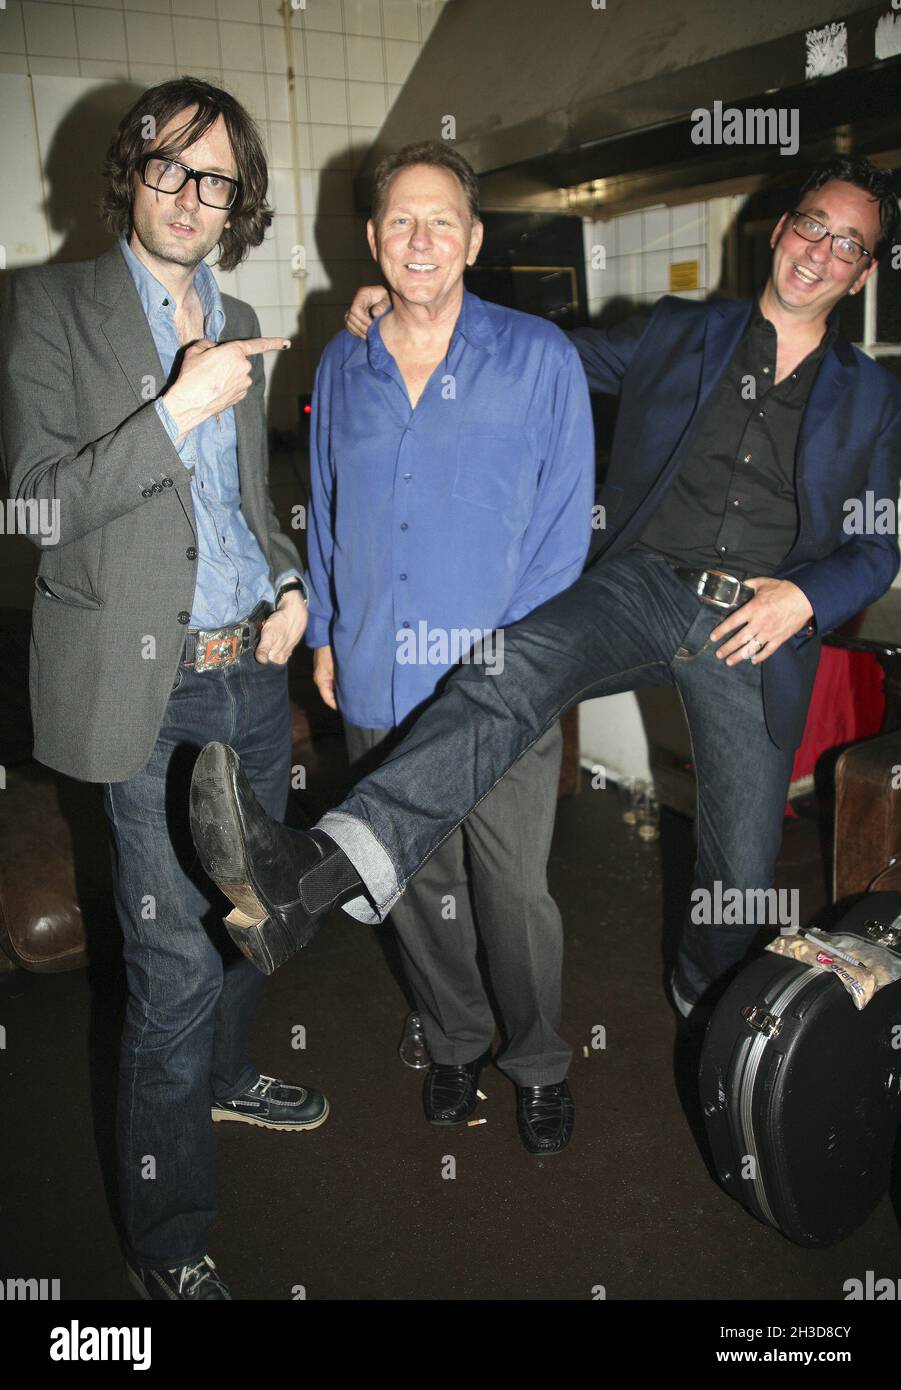 Jarvis Cocker, Bob Lind and Richard Hawley backstage at The Luminaire, Kilburn, London, Friday June 15, 2007.  Bob Lind was joined on stage for several songs by Richard Hawley. Stock Photo